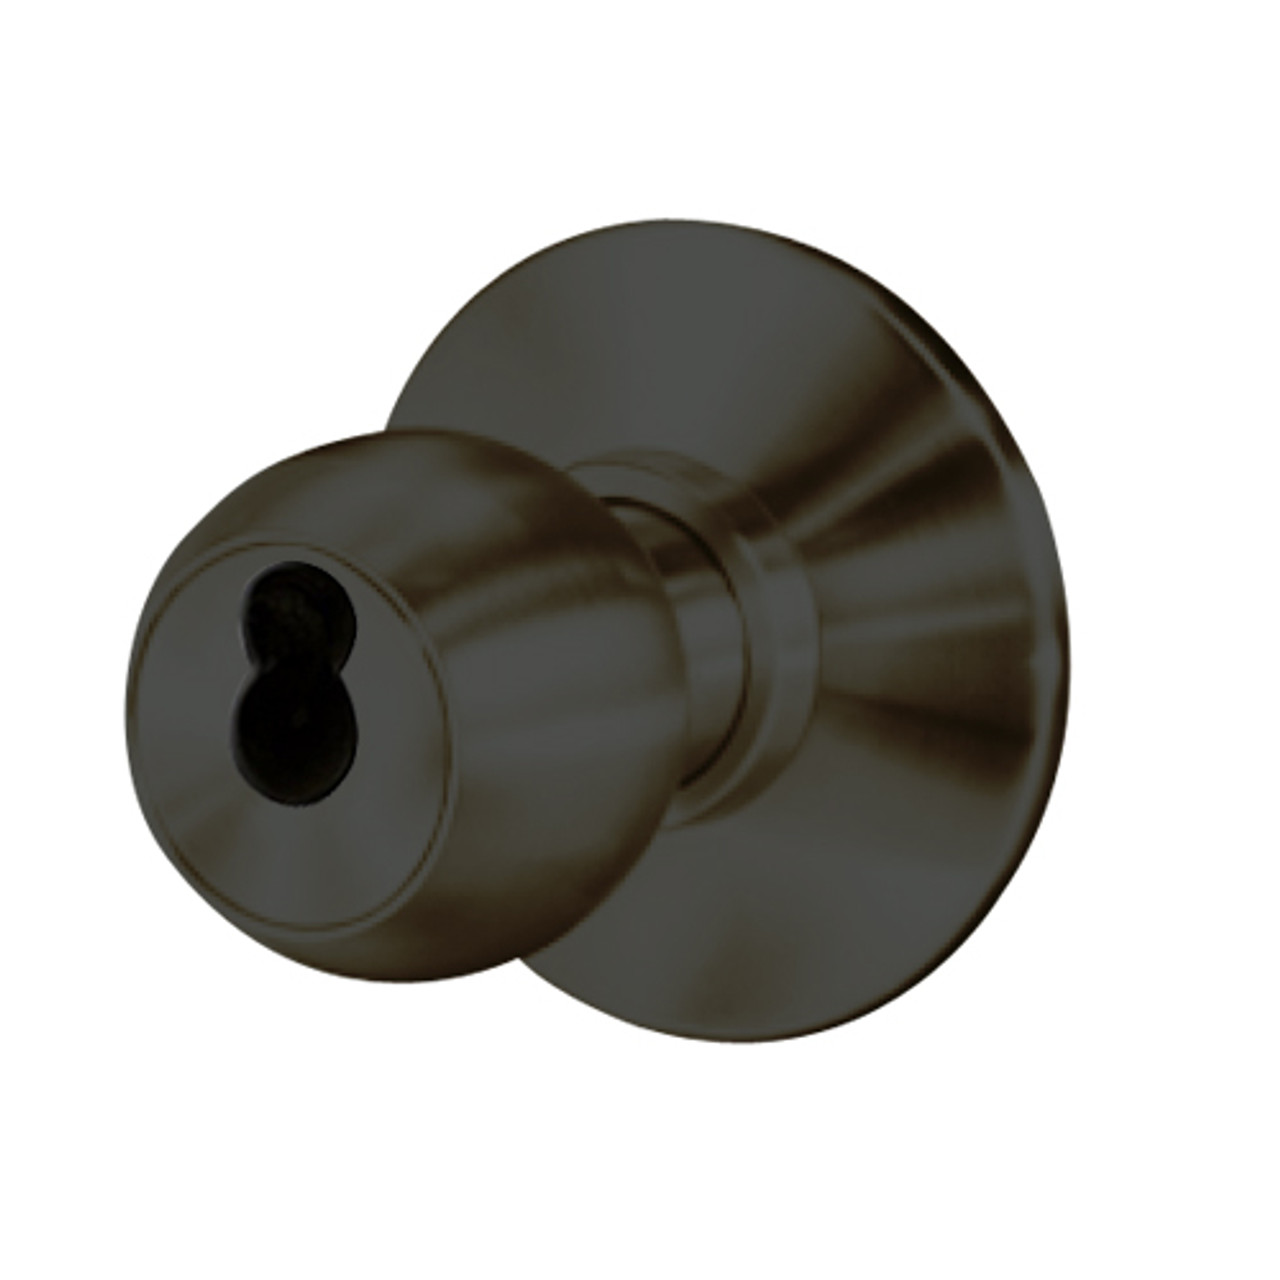 8K47YR4DSTK613 Best 8K Series Exit Heavy Duty Cylindrical Knob Locks with Round Style in Oil Rubbed Bronze